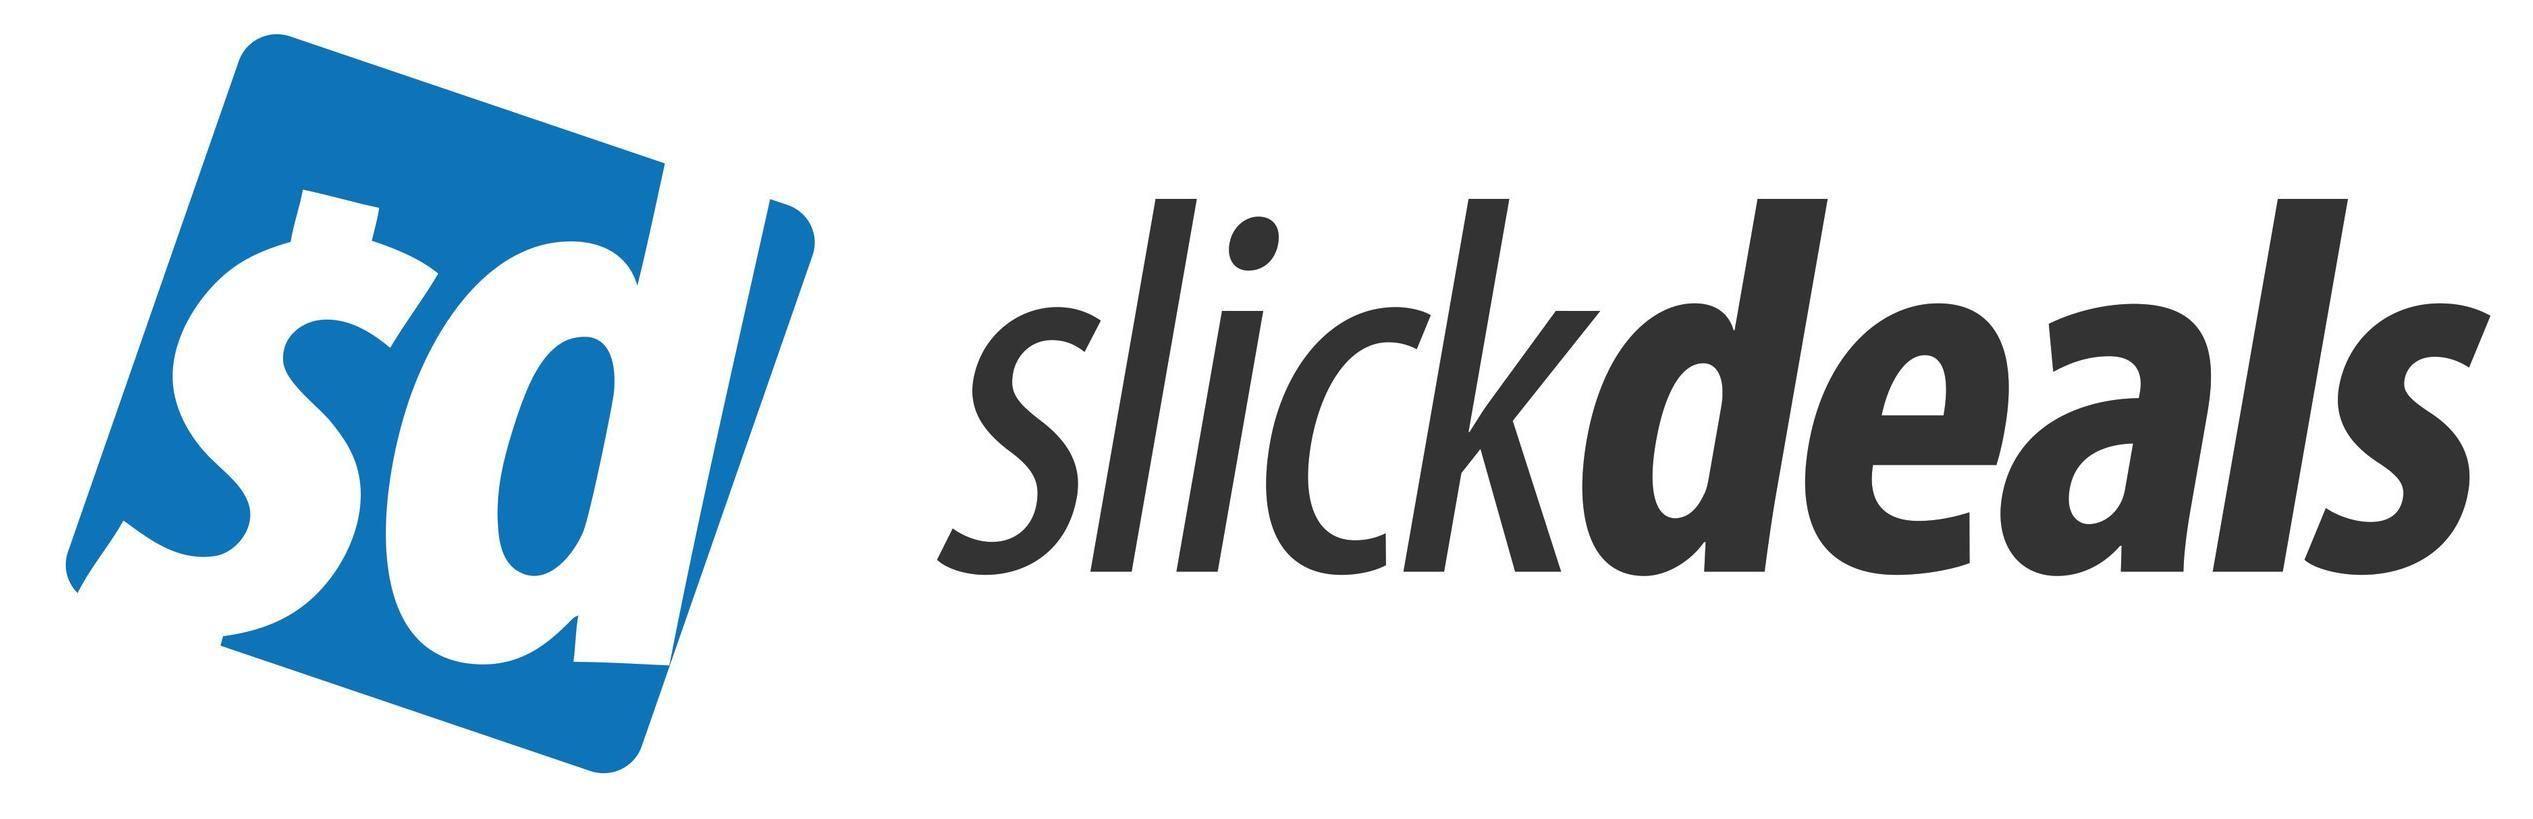 Slickdeals.net Logo - Slickdeals Competitors, Revenue and Employees - Owler Company Profile